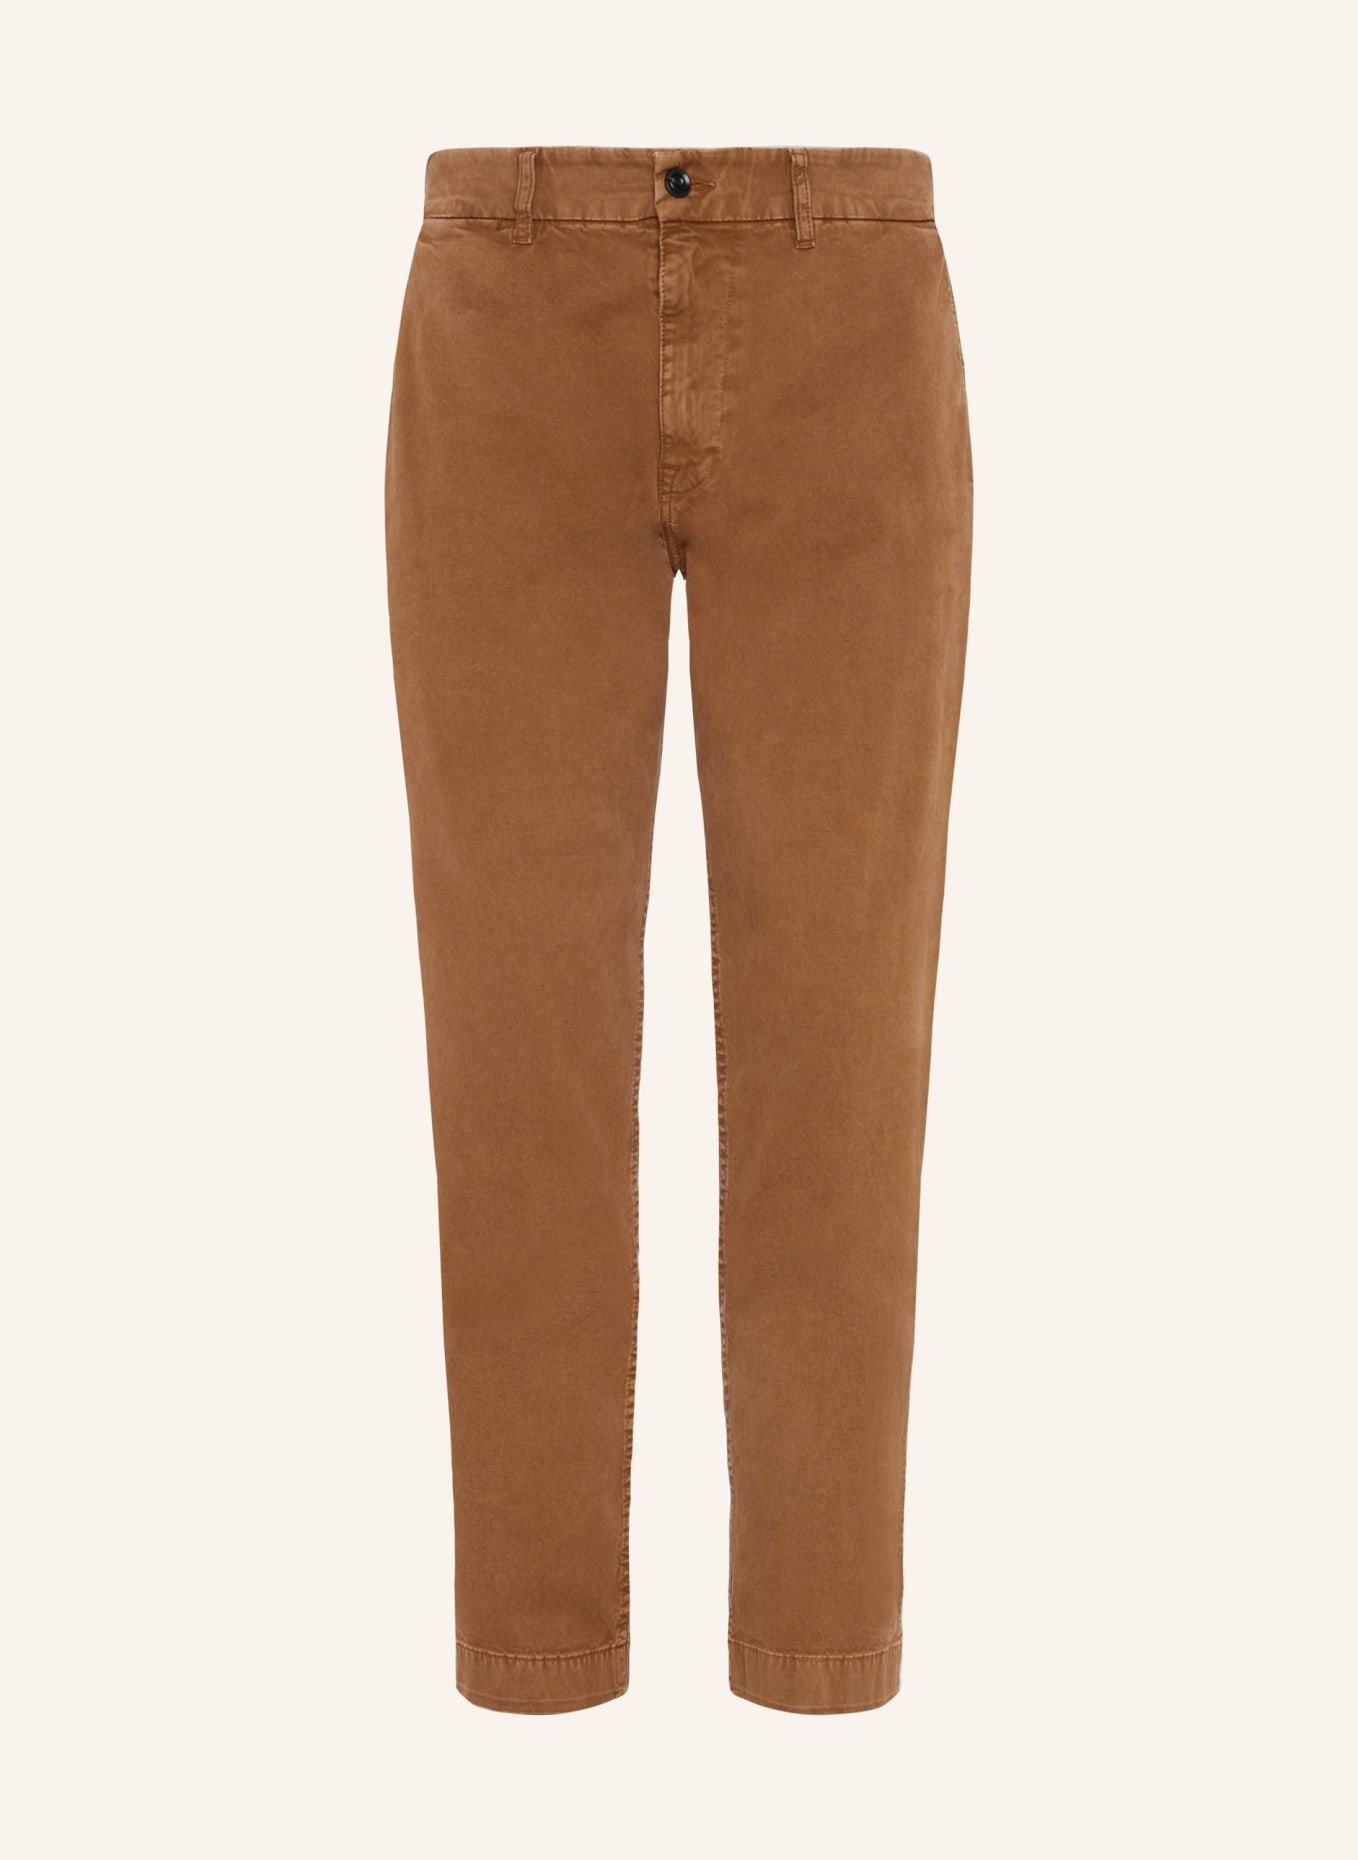 7 for all mankind Pants STRAIGHT CHINO Straight fit, Farbe: BRAUN (Bild 1)